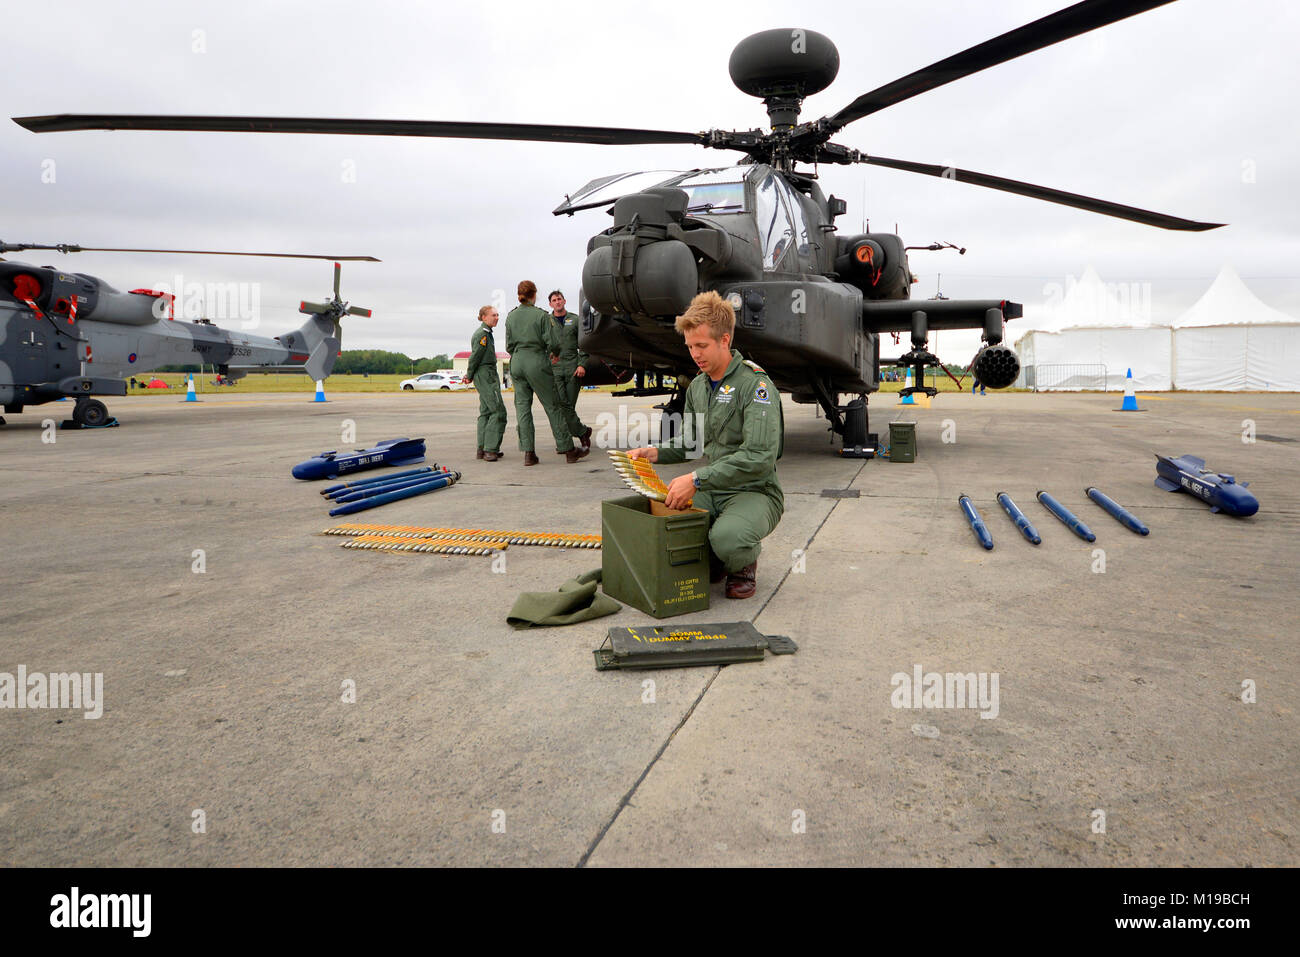 British Army AH-64 Apache gunship with crewman loading gun shells into an ammunition box. Weapons. Defense industry. Military personnel, crew Stock Photo